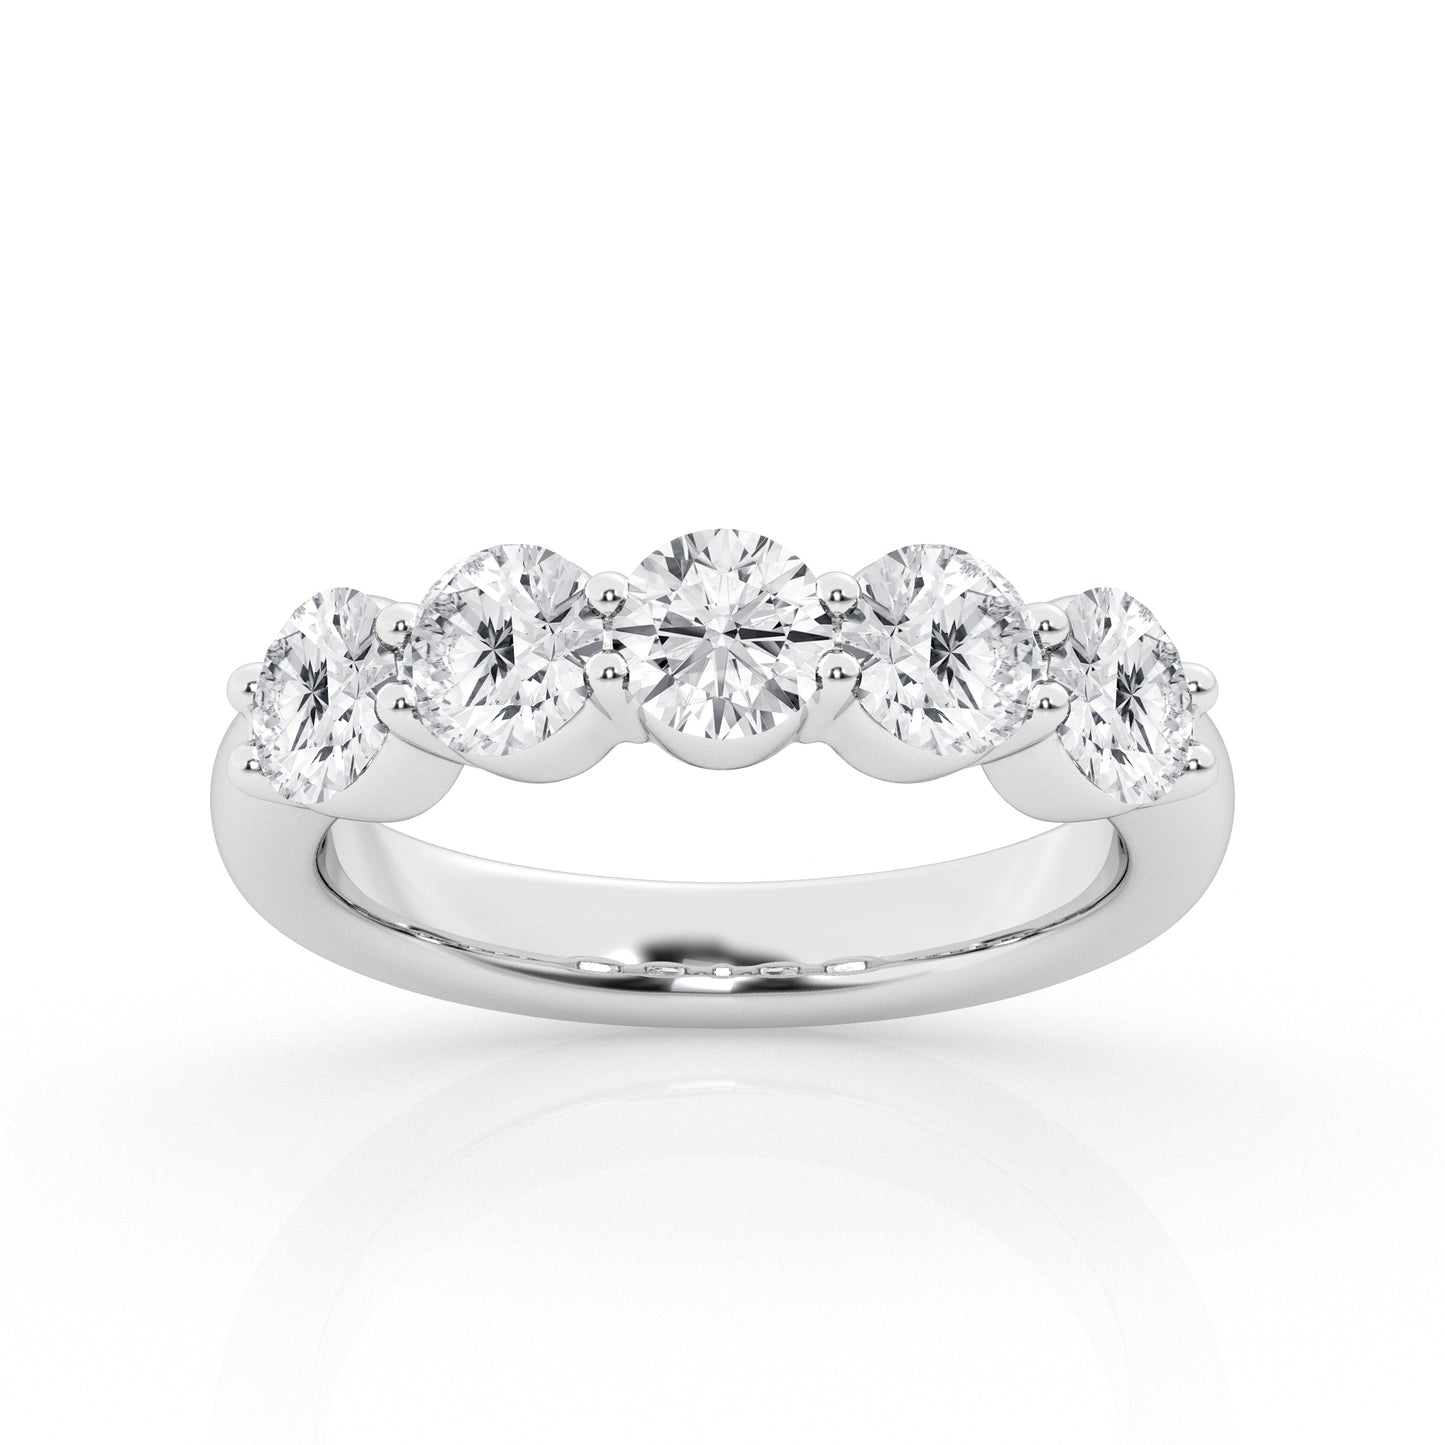 3.50 cttw - Round - 5 Stone Engagement Ring